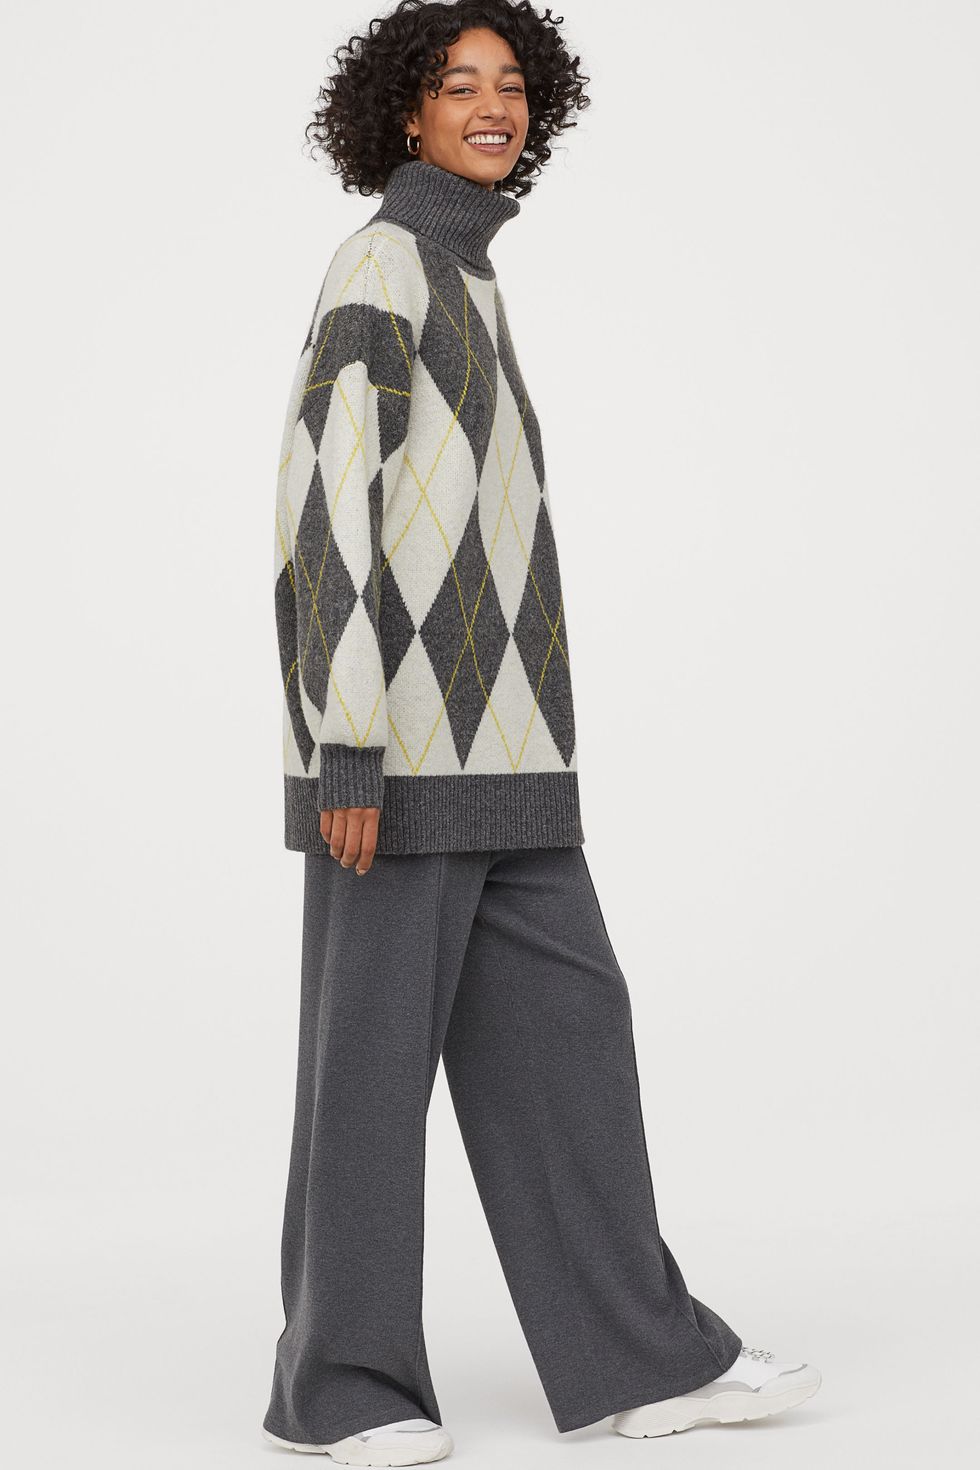 Pringle of Scotland x H&M collection: See all the knitwear here